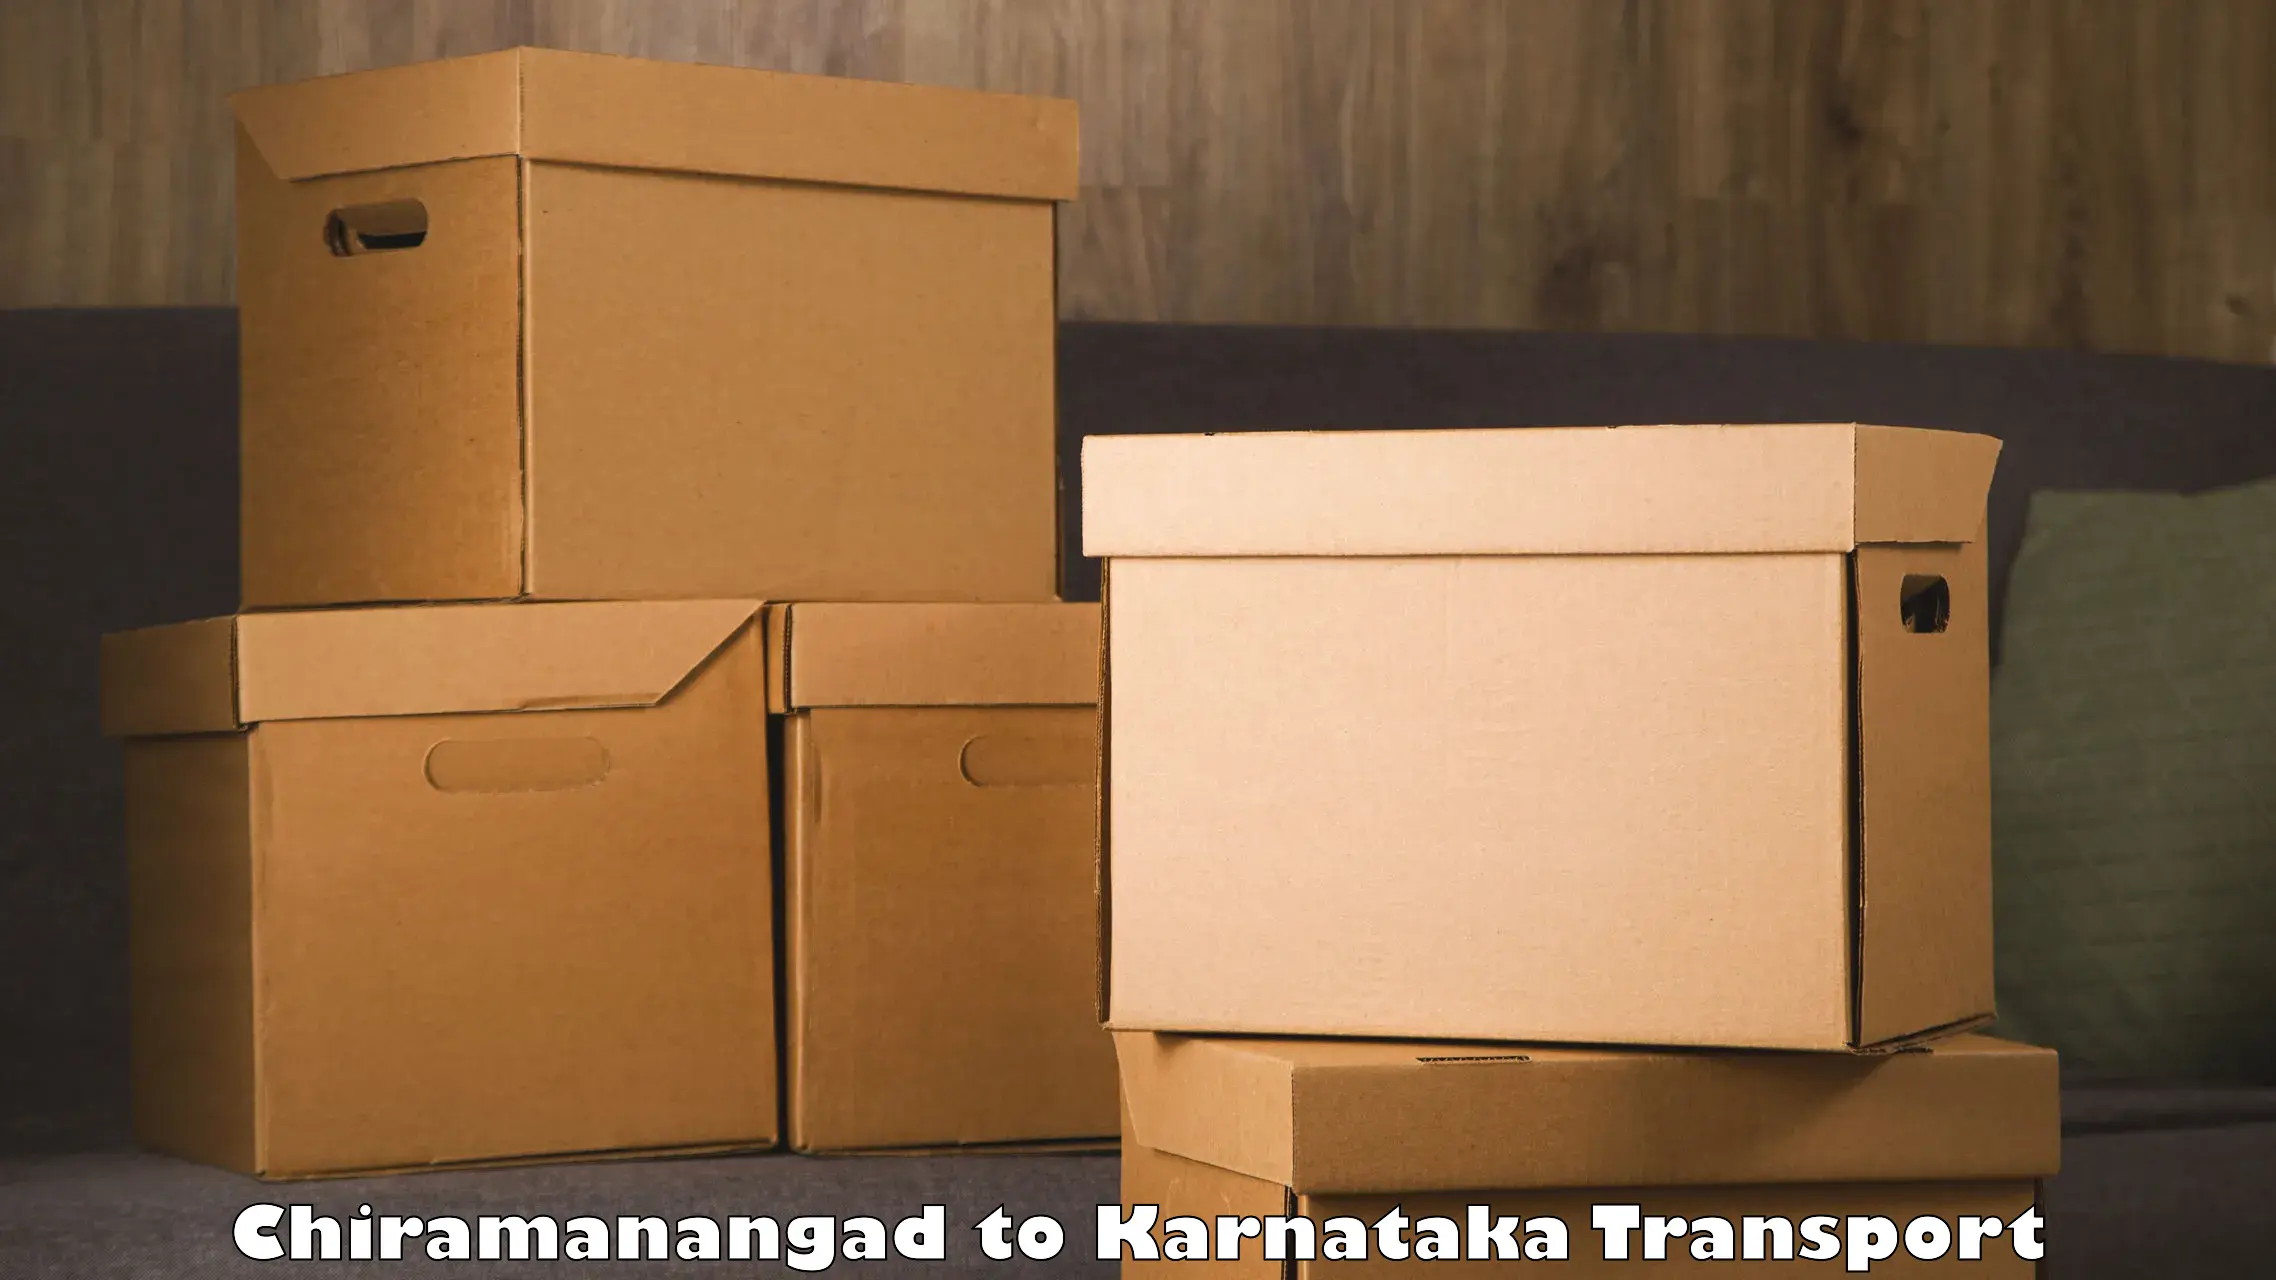 Air freight transport services Chiramanangad to Chikkamagalur